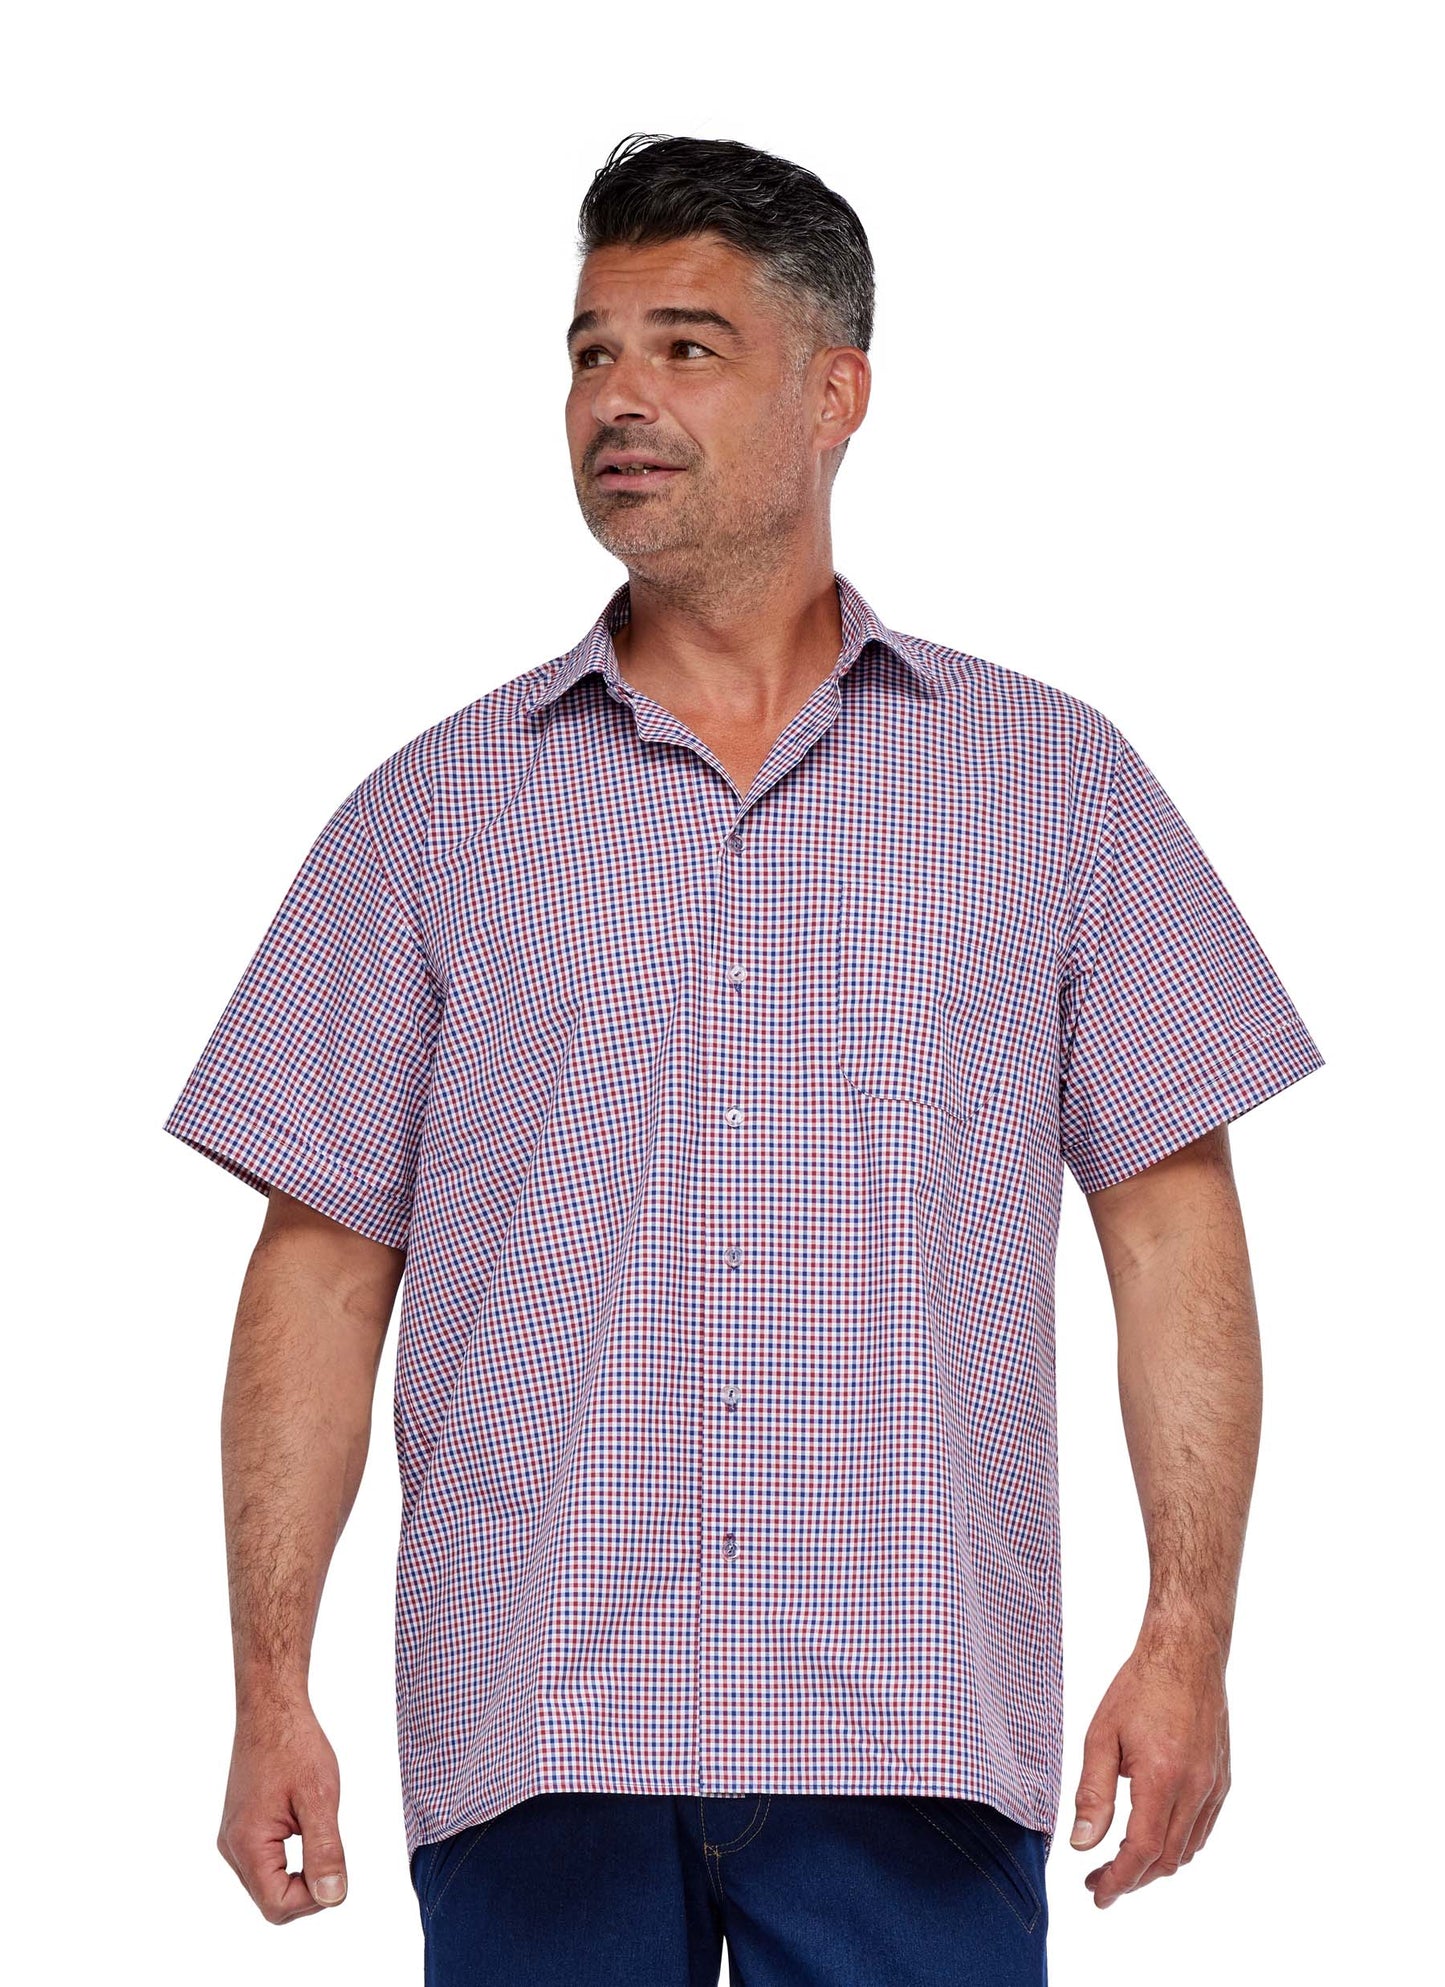 Men's Classic Oxford Short Sleeve Shirt with Cross Over Back (4262)